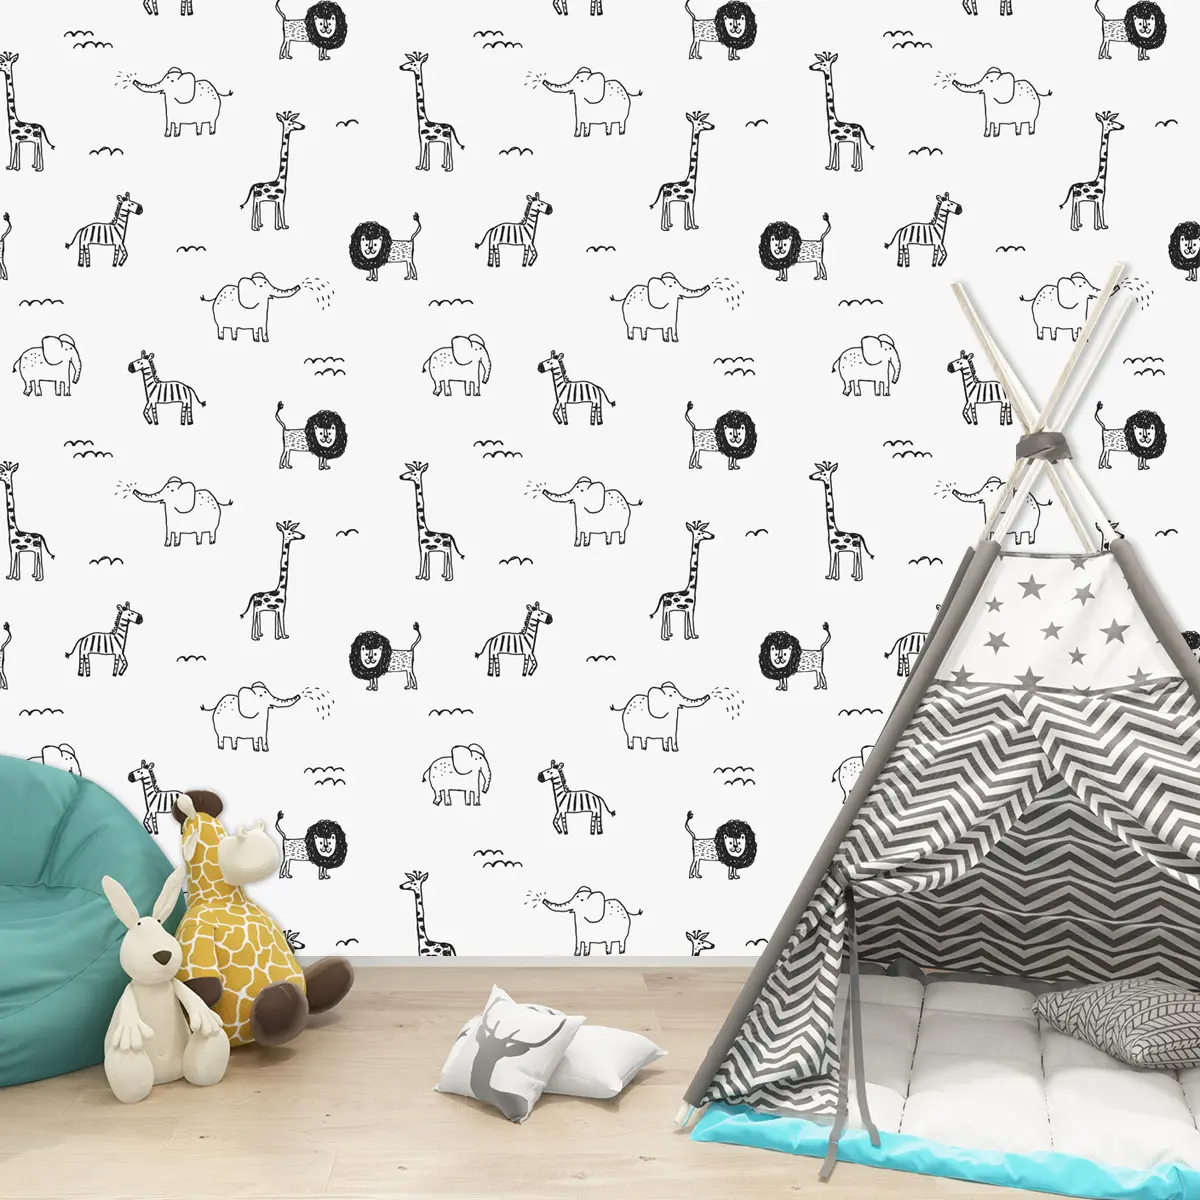 Lovely Black and White Kids/animal/car Cartoon Pattern Self Adhesive Wallpaper Decorative Wall Stickers for Kids